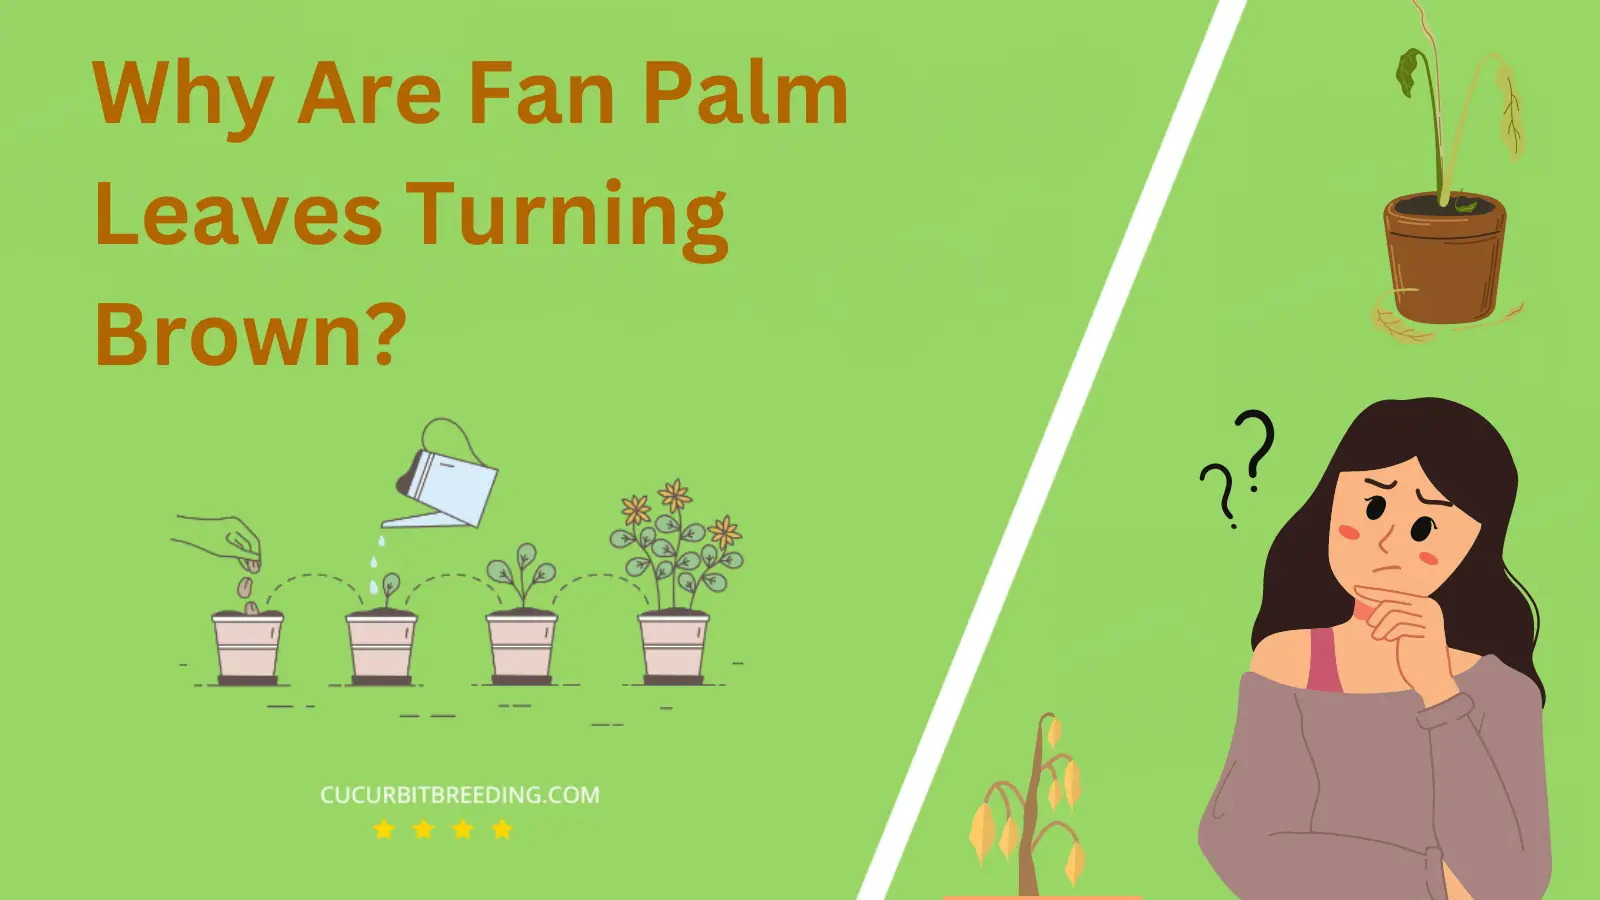 Why Are Fan Palm Leaves Turning Brown